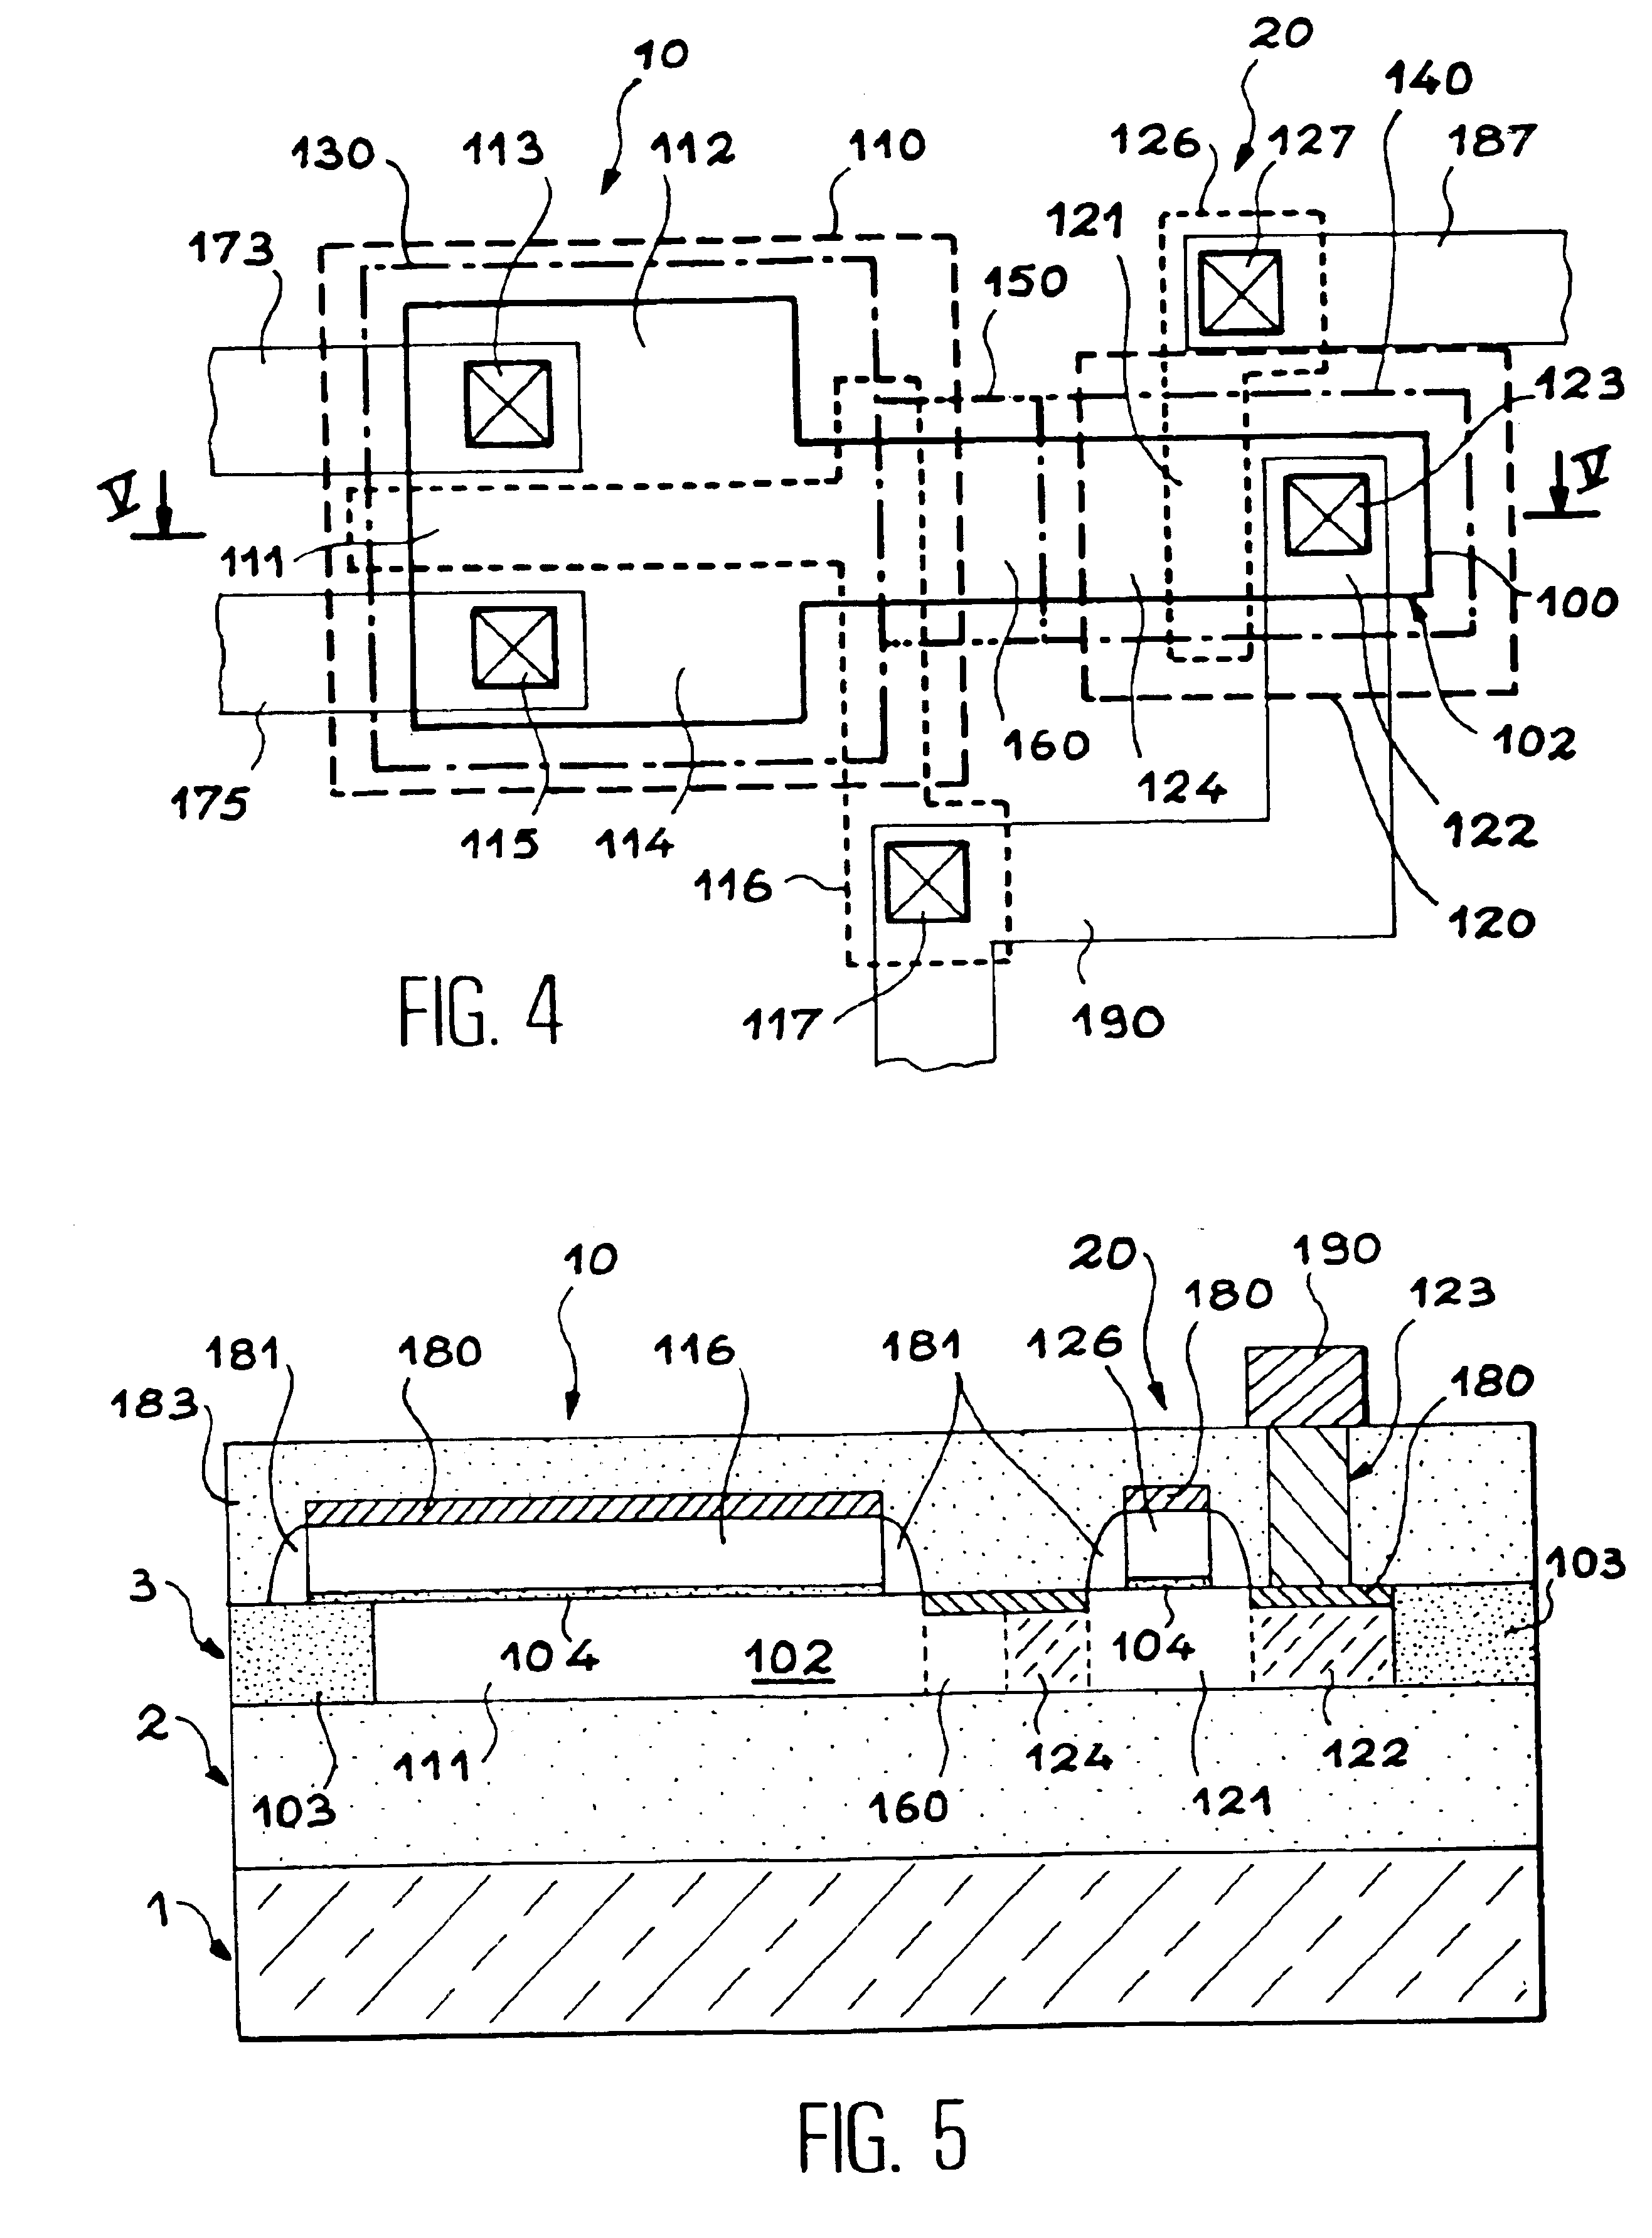 Dynamic threshold voltage MOS transistor fitted with a current limiter